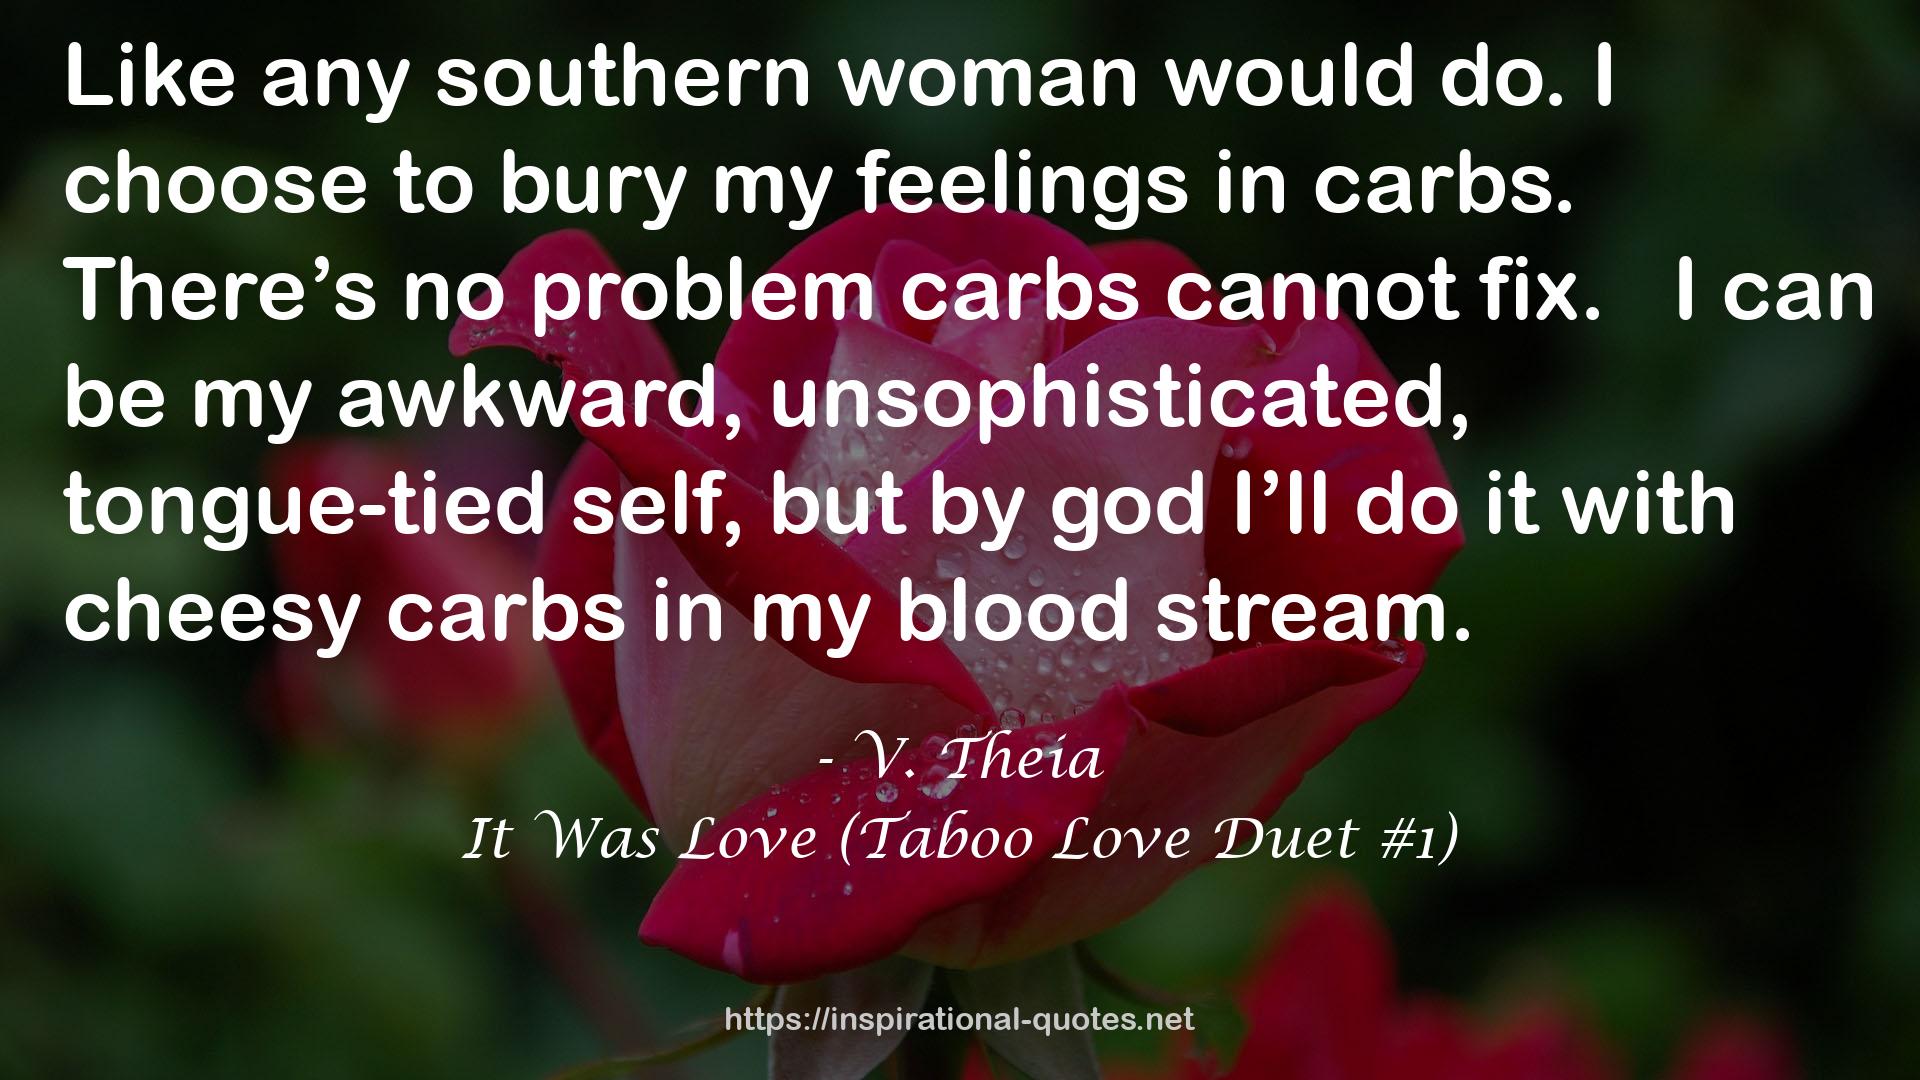 It Was Love (Taboo Love Duet #1) QUOTES